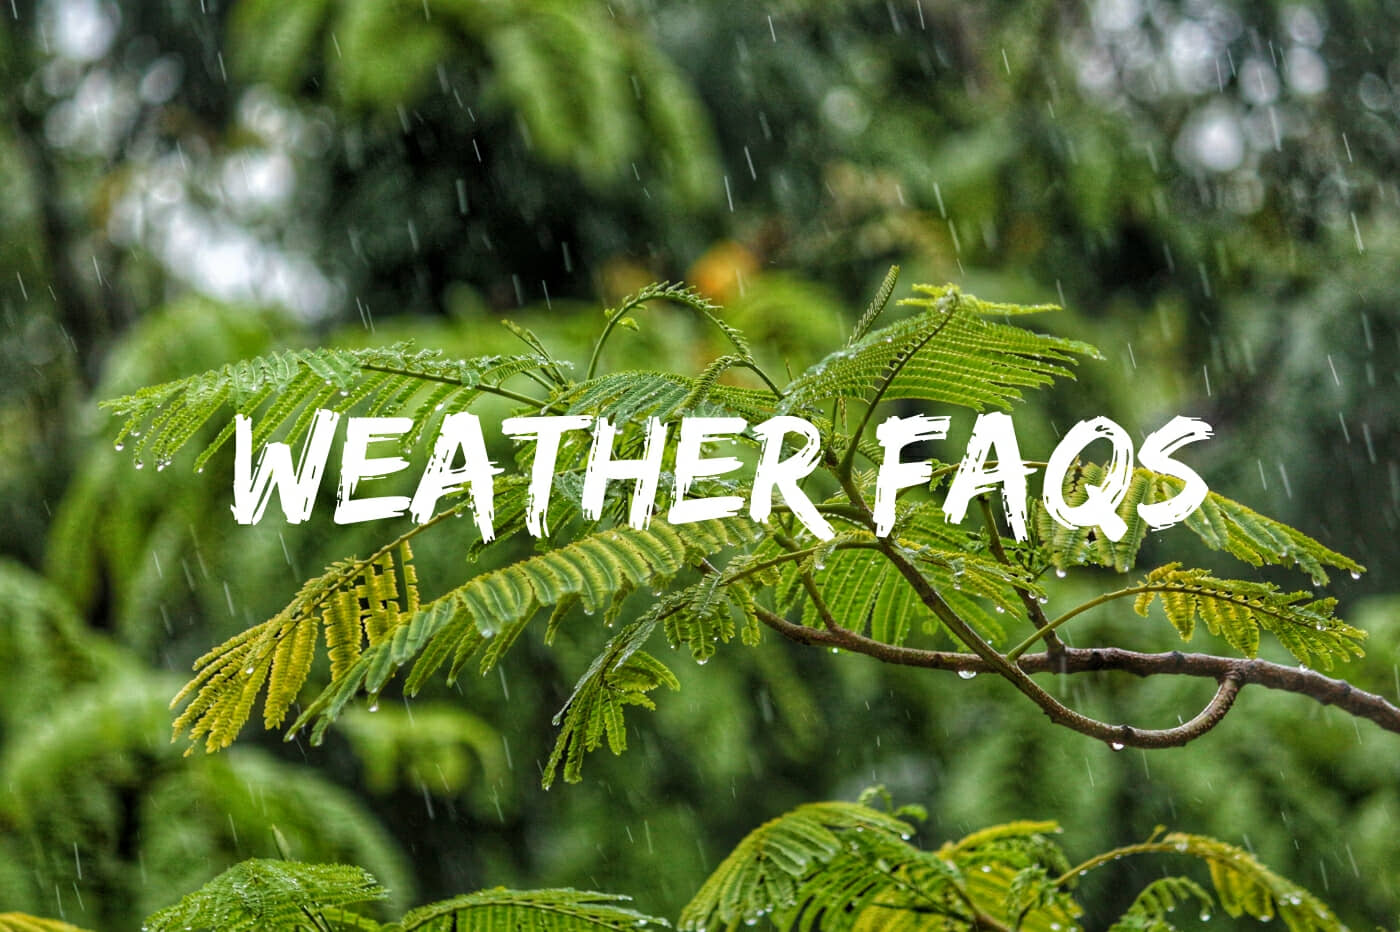 St. Lucia weather faqs featured image